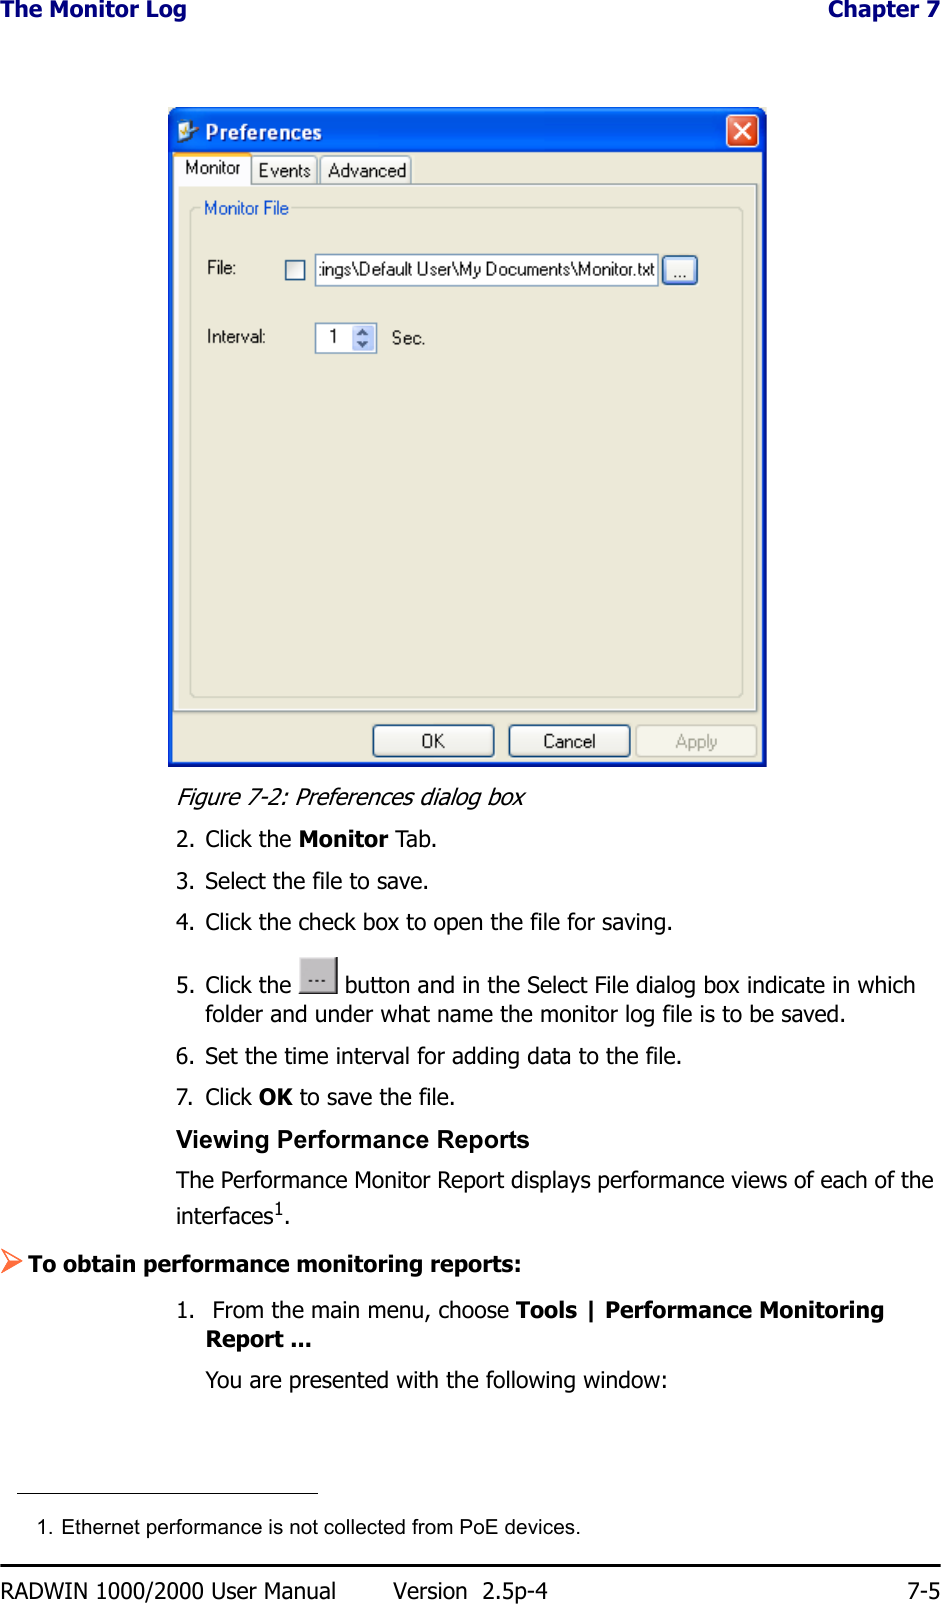 The Monitor Log  Chapter 7RADWIN 1000/2000 User Manual Version  2.5p-4 7-5Figure 7-2: Preferences dialog box2. Click the Monitor Tab.3. Select the file to save.4. Click the check box to open the file for saving.5. Click the   button and in the Select File dialog box indicate in which folder and under what name the monitor log file is to be saved.6. Set the time interval for adding data to the file.7. Click OK to save the file.Viewing Performance ReportsThe Performance Monitor Report displays performance views of each of the interfaces1.¾To obtain performance monitoring reports:1.  From the main menu, choose Tools | Performance Monitoring Report ...You are presented with the following window:1. Ethernet performance is not collected from PoE devices.